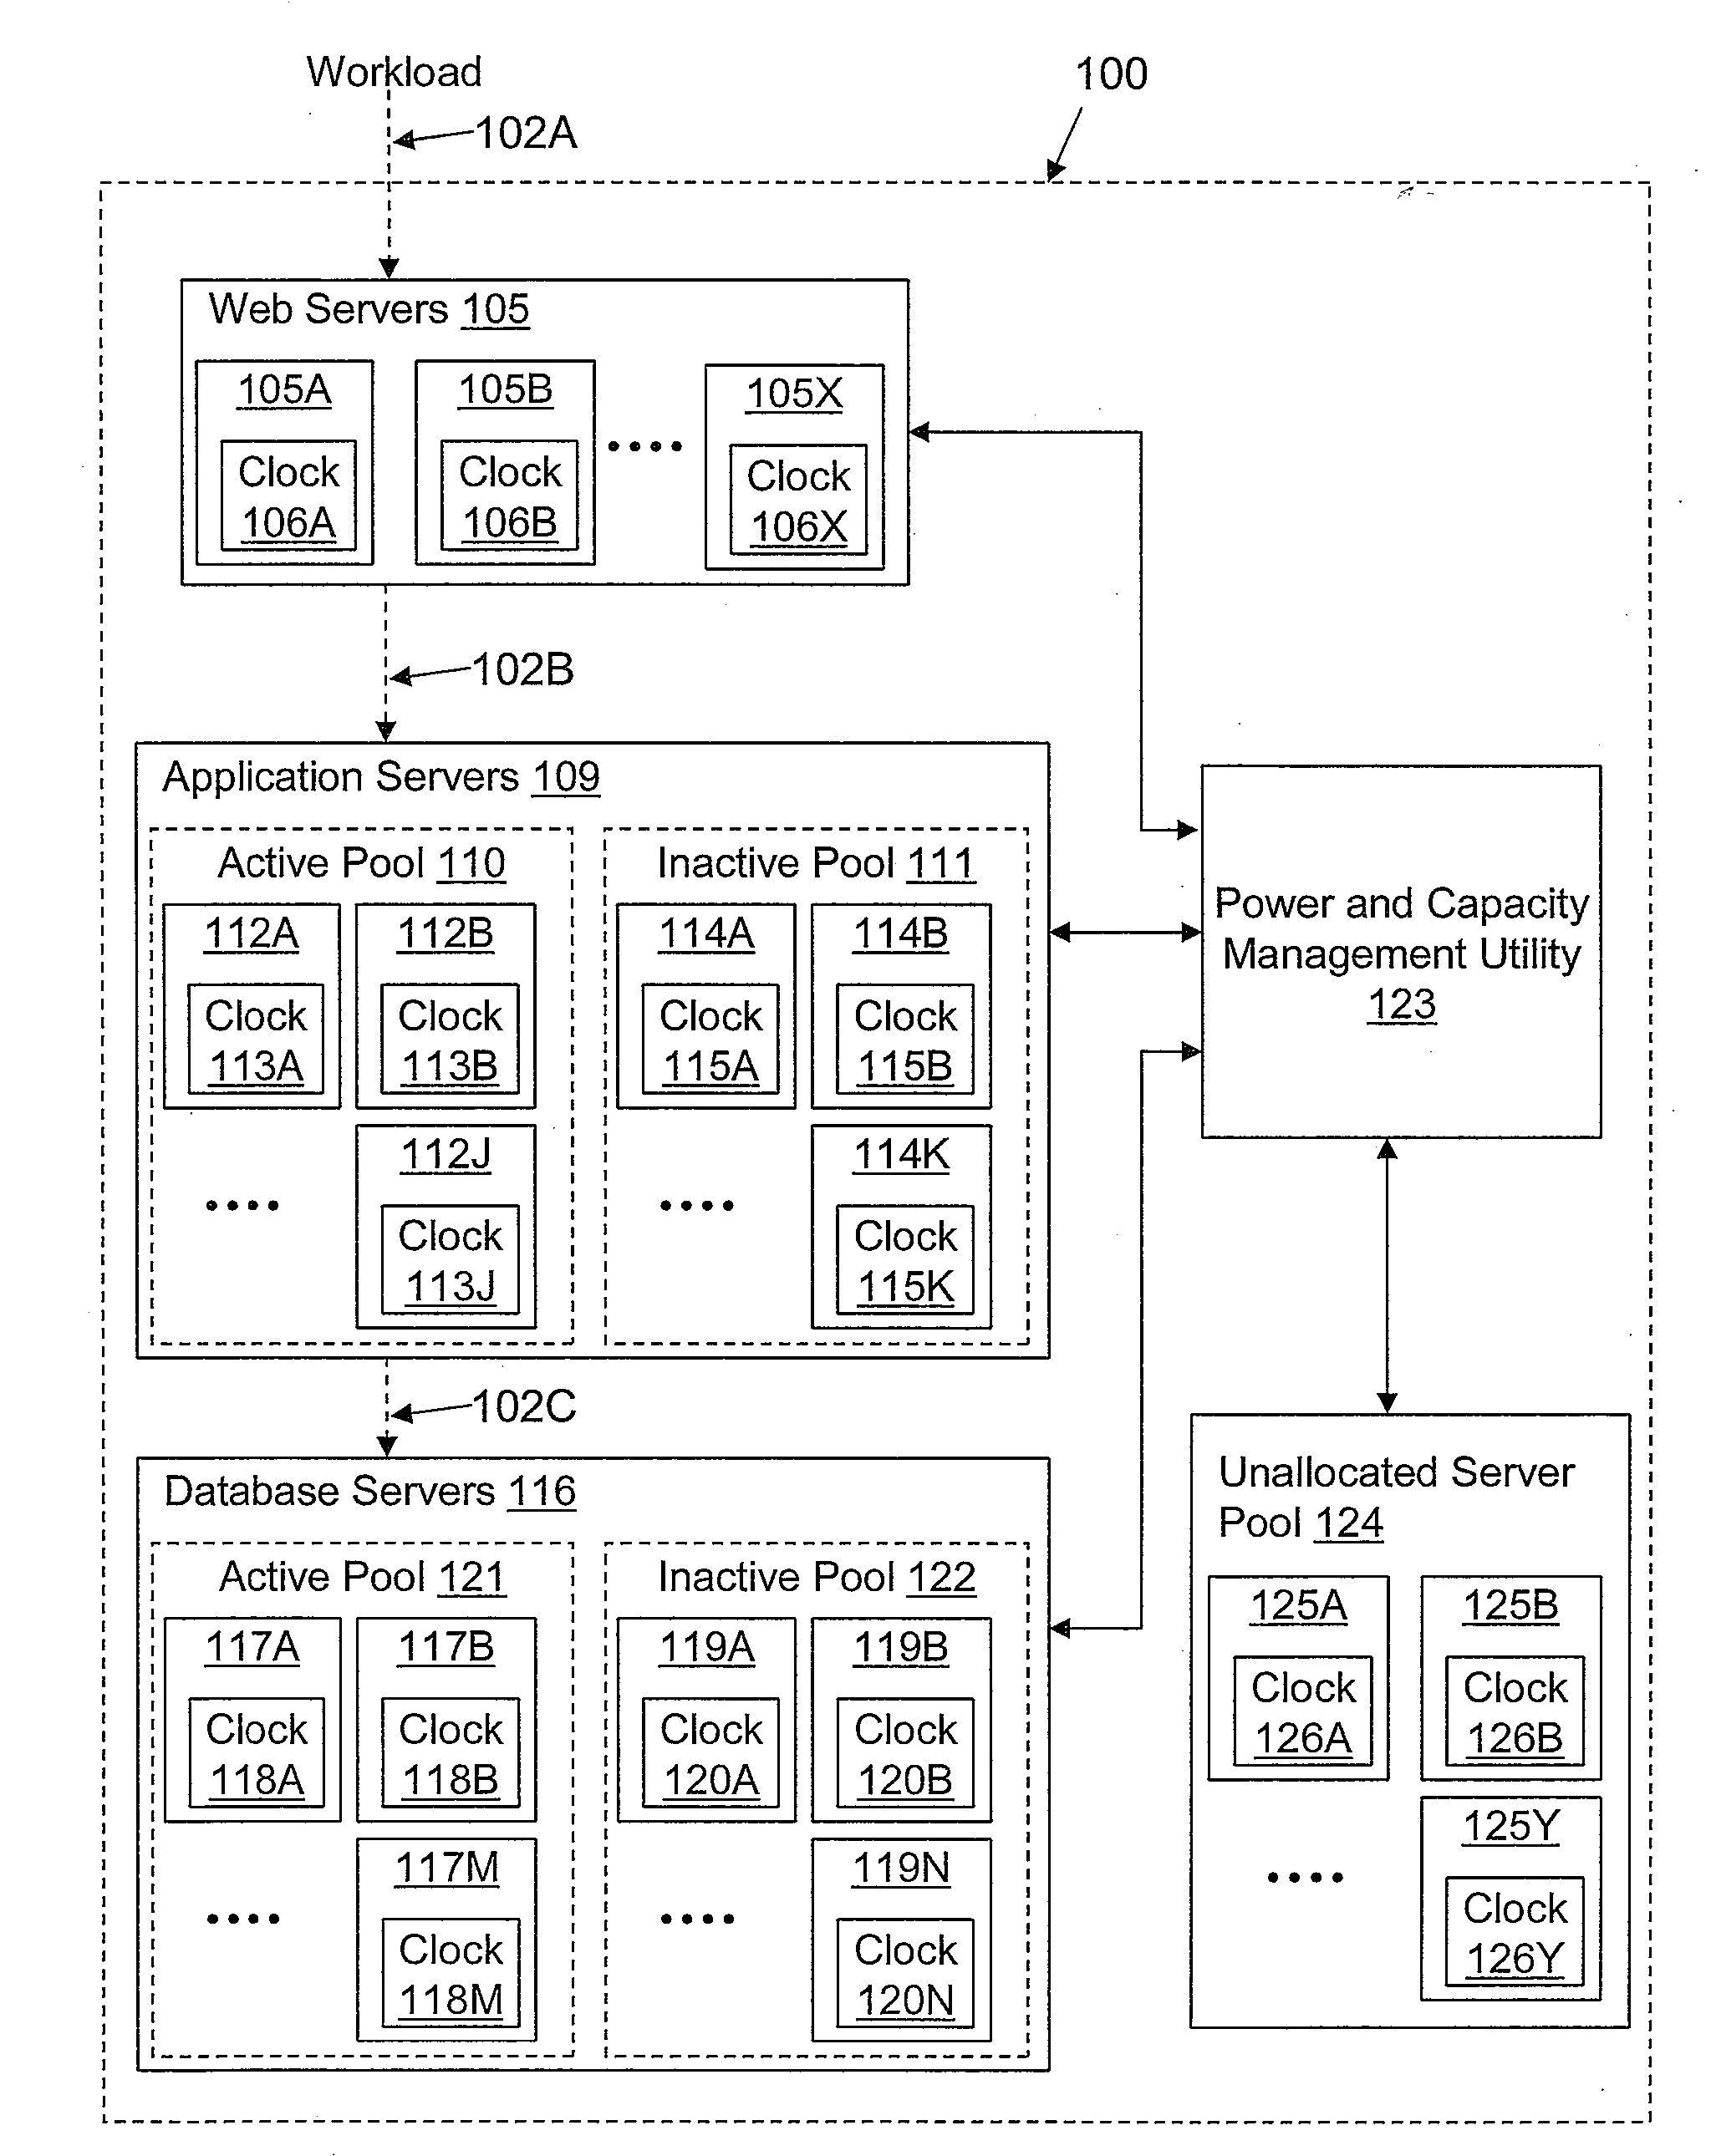 Method and system for managing data center power usage based on service commitments